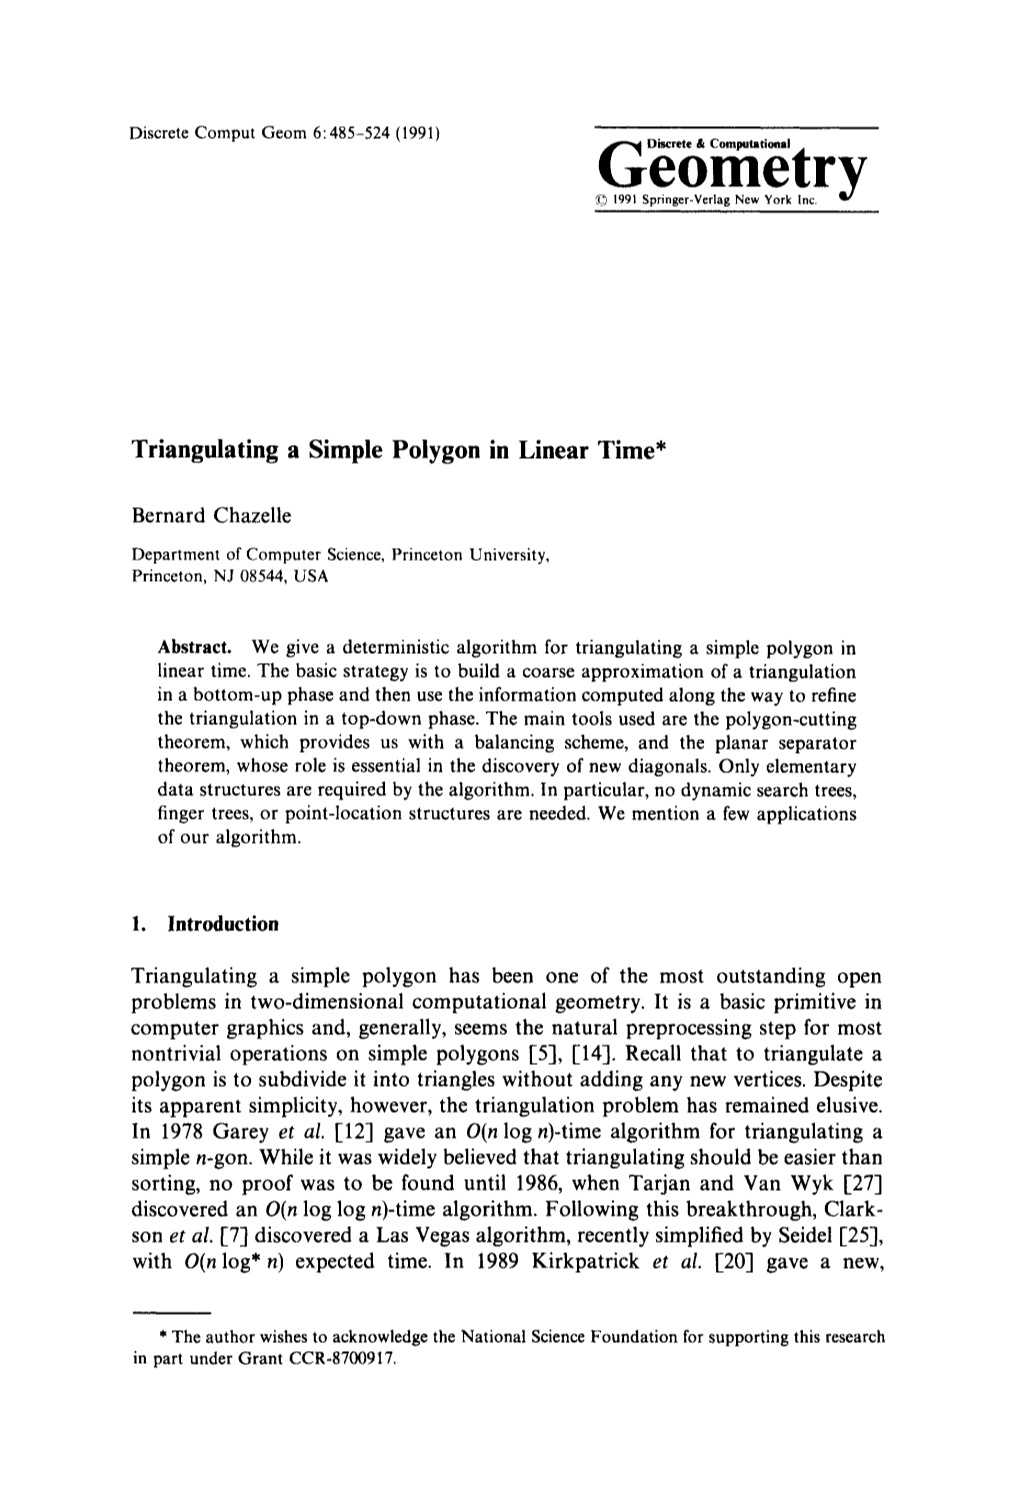 Triangulating a Simple Polygon in Linear Time*